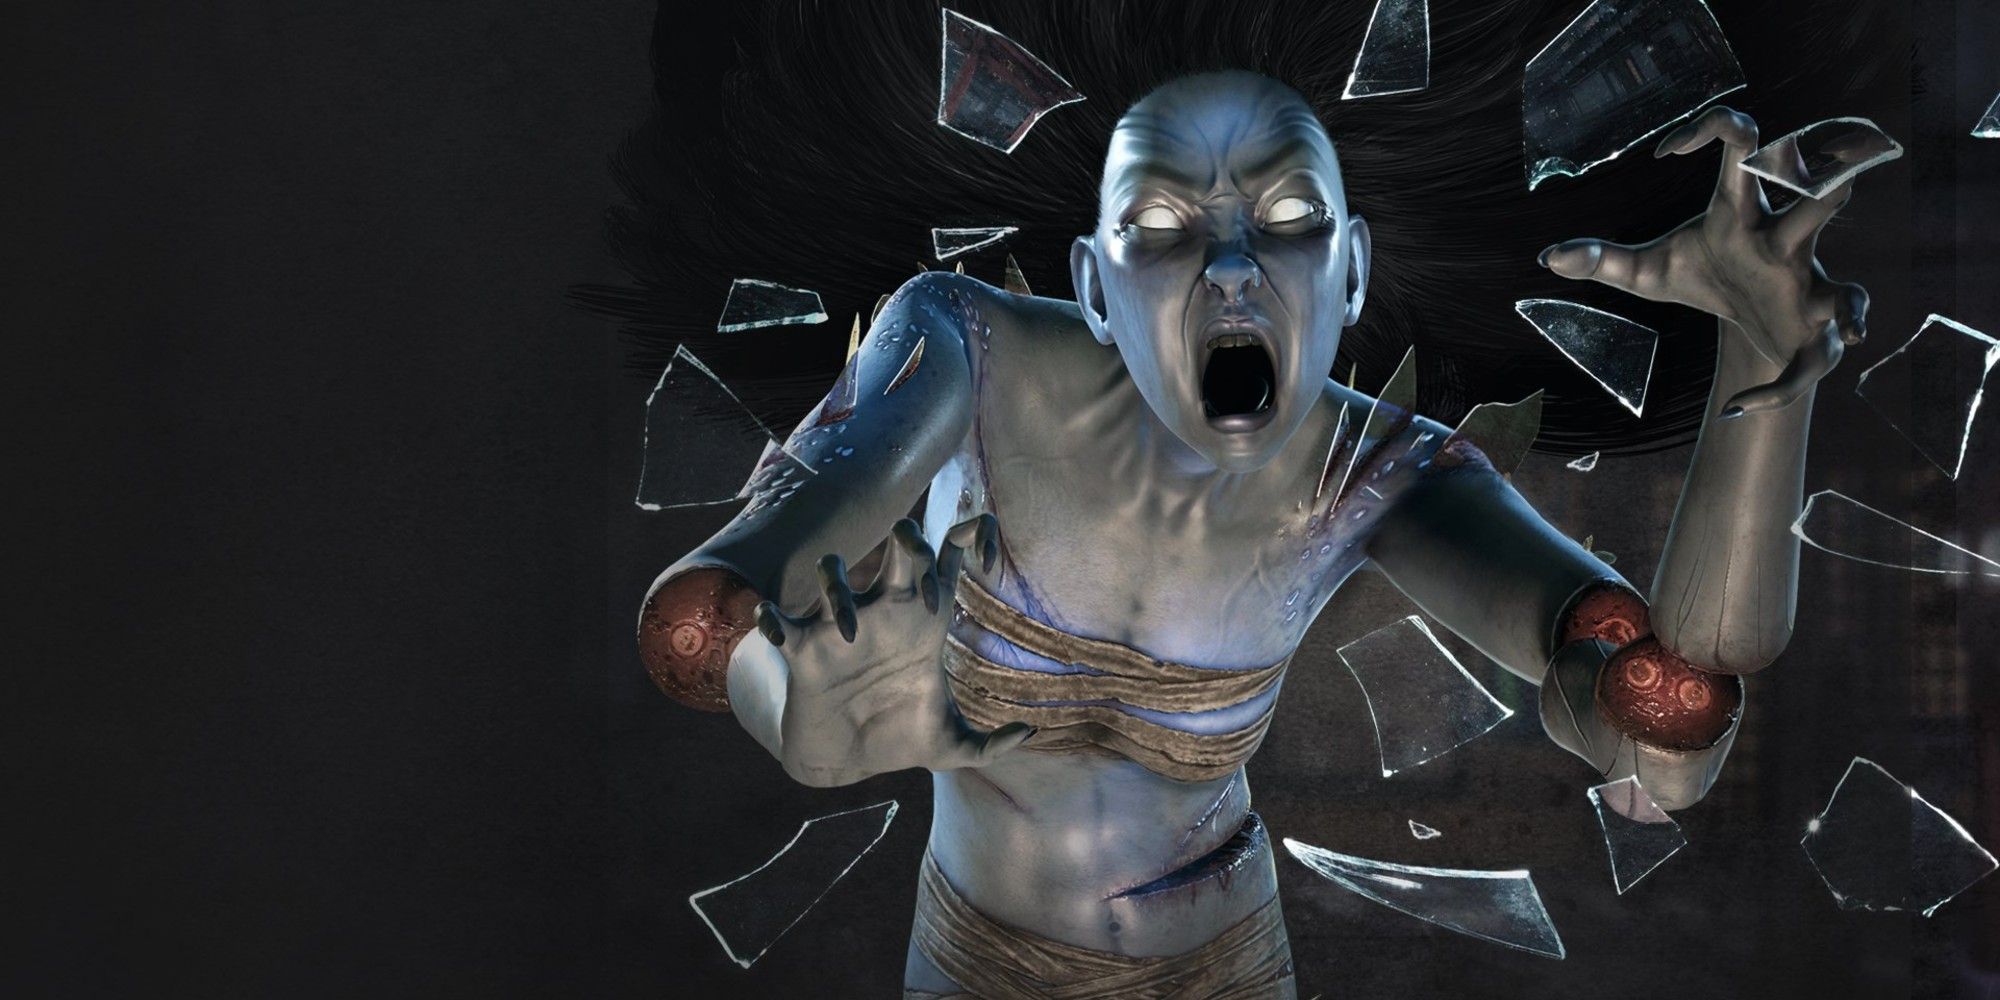 The Spirit surrounded by broken glass in the Shattered Bloodlines chapter of Dead By Daylight